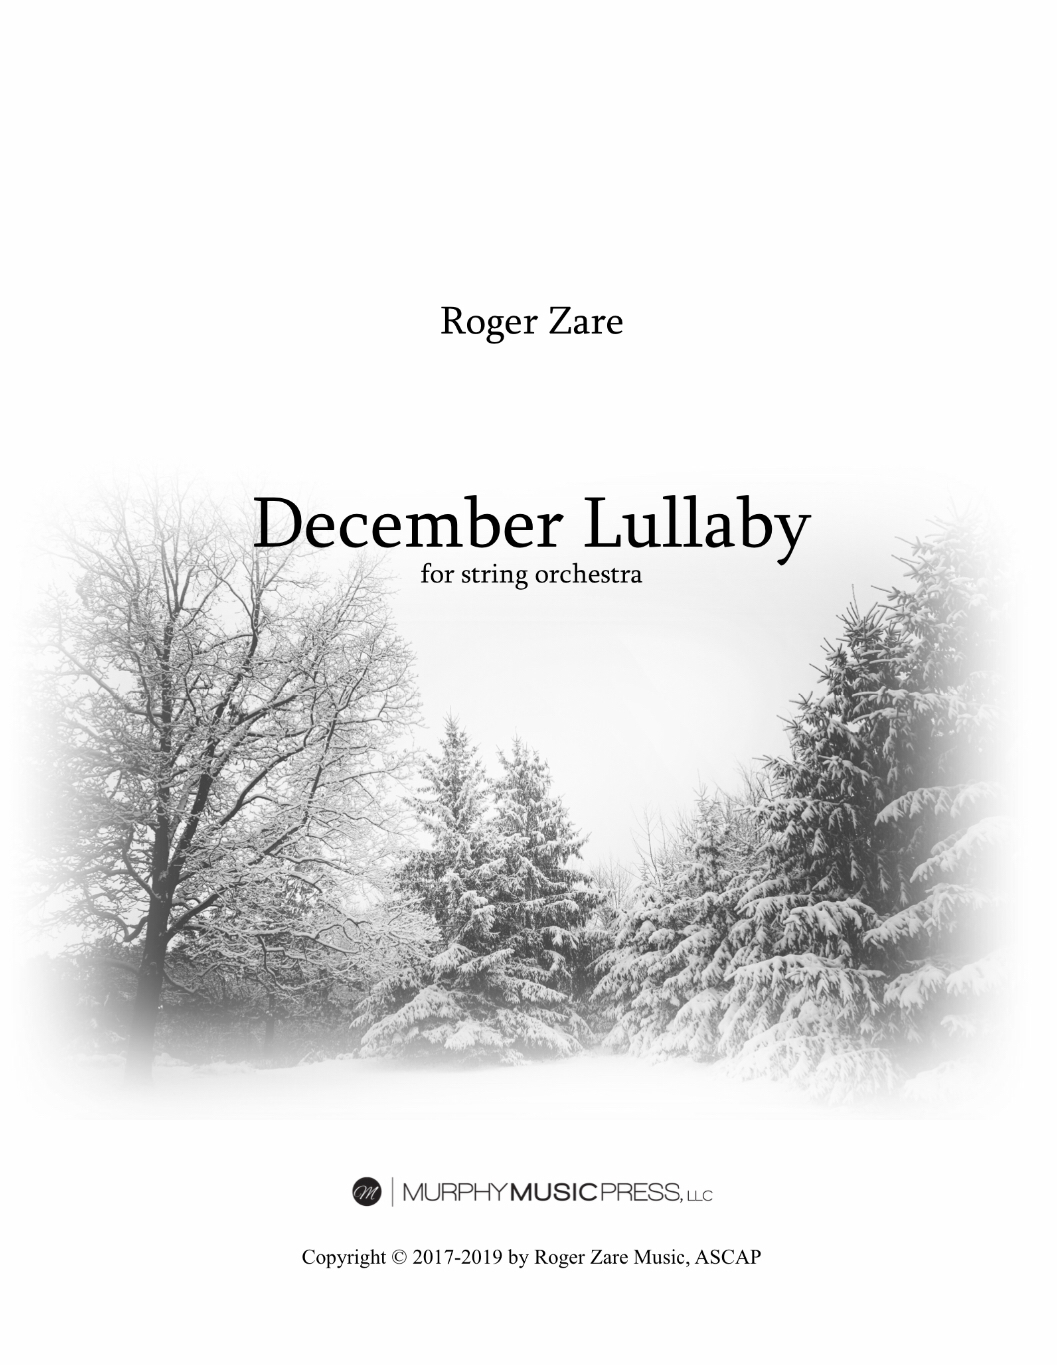 December Lullaby (String Orchestra Version, Score Only) by Roger Zare